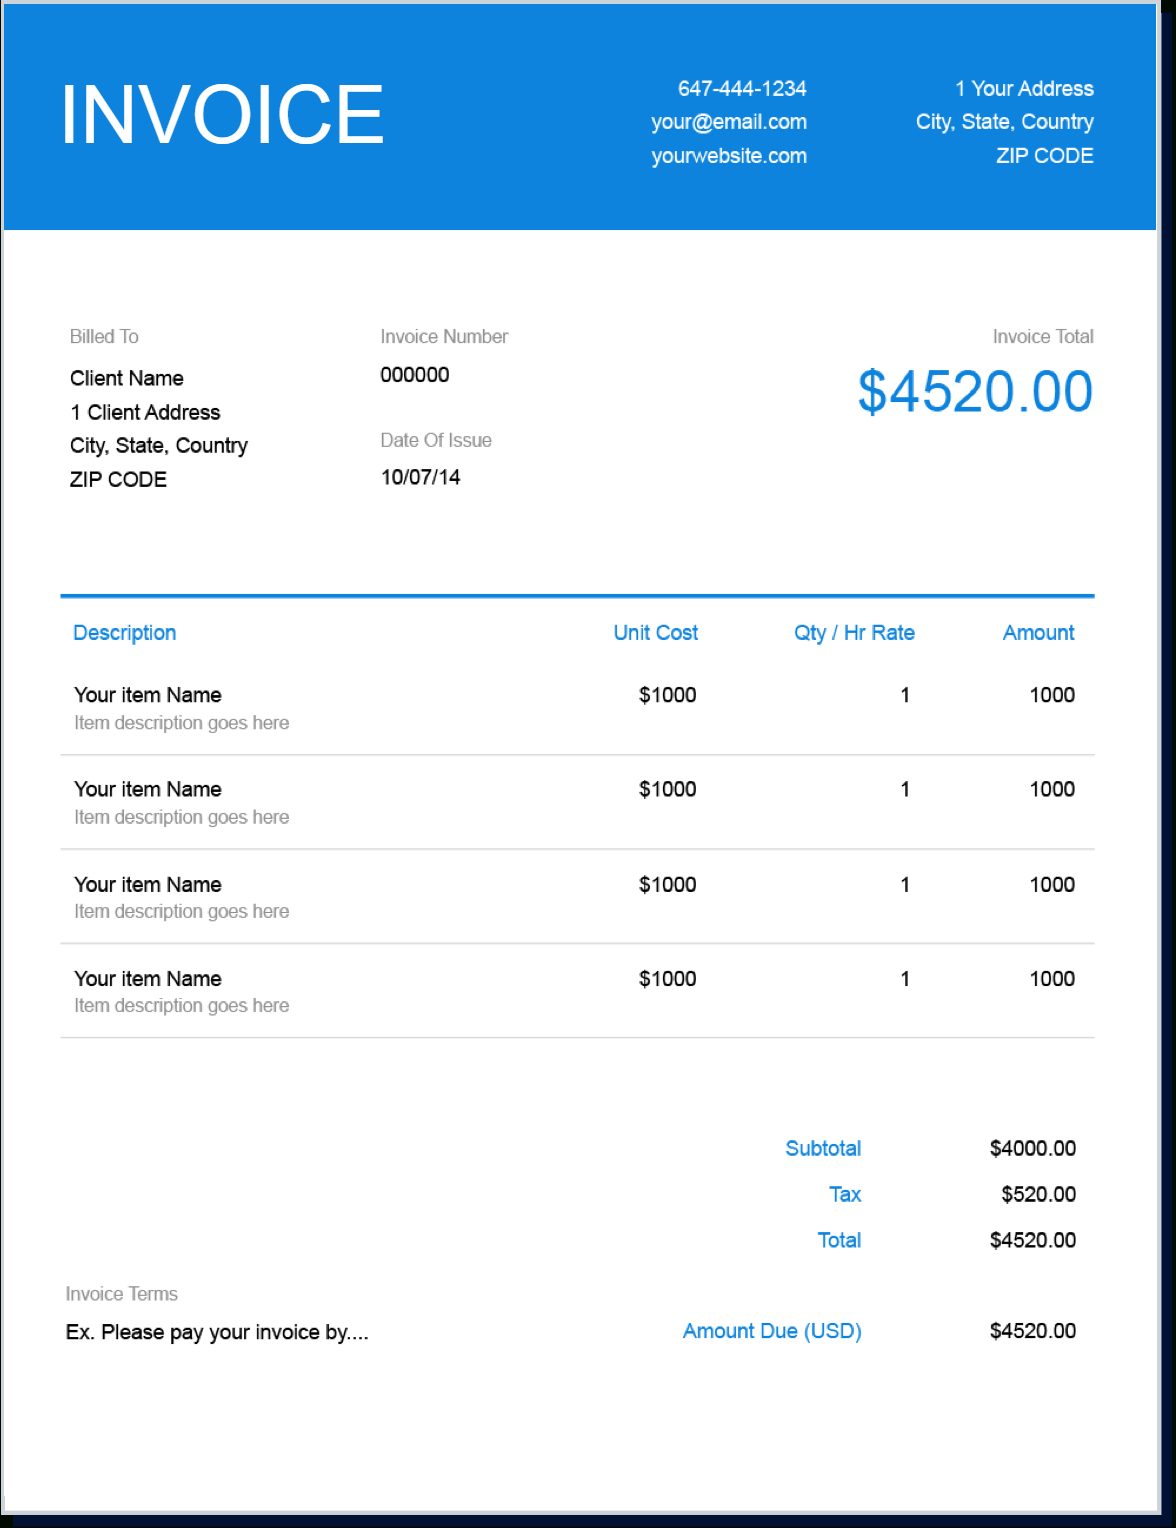 Invoice Template | Create And Send Free Invoices Instantly With Regard To I Need An Invoice Template